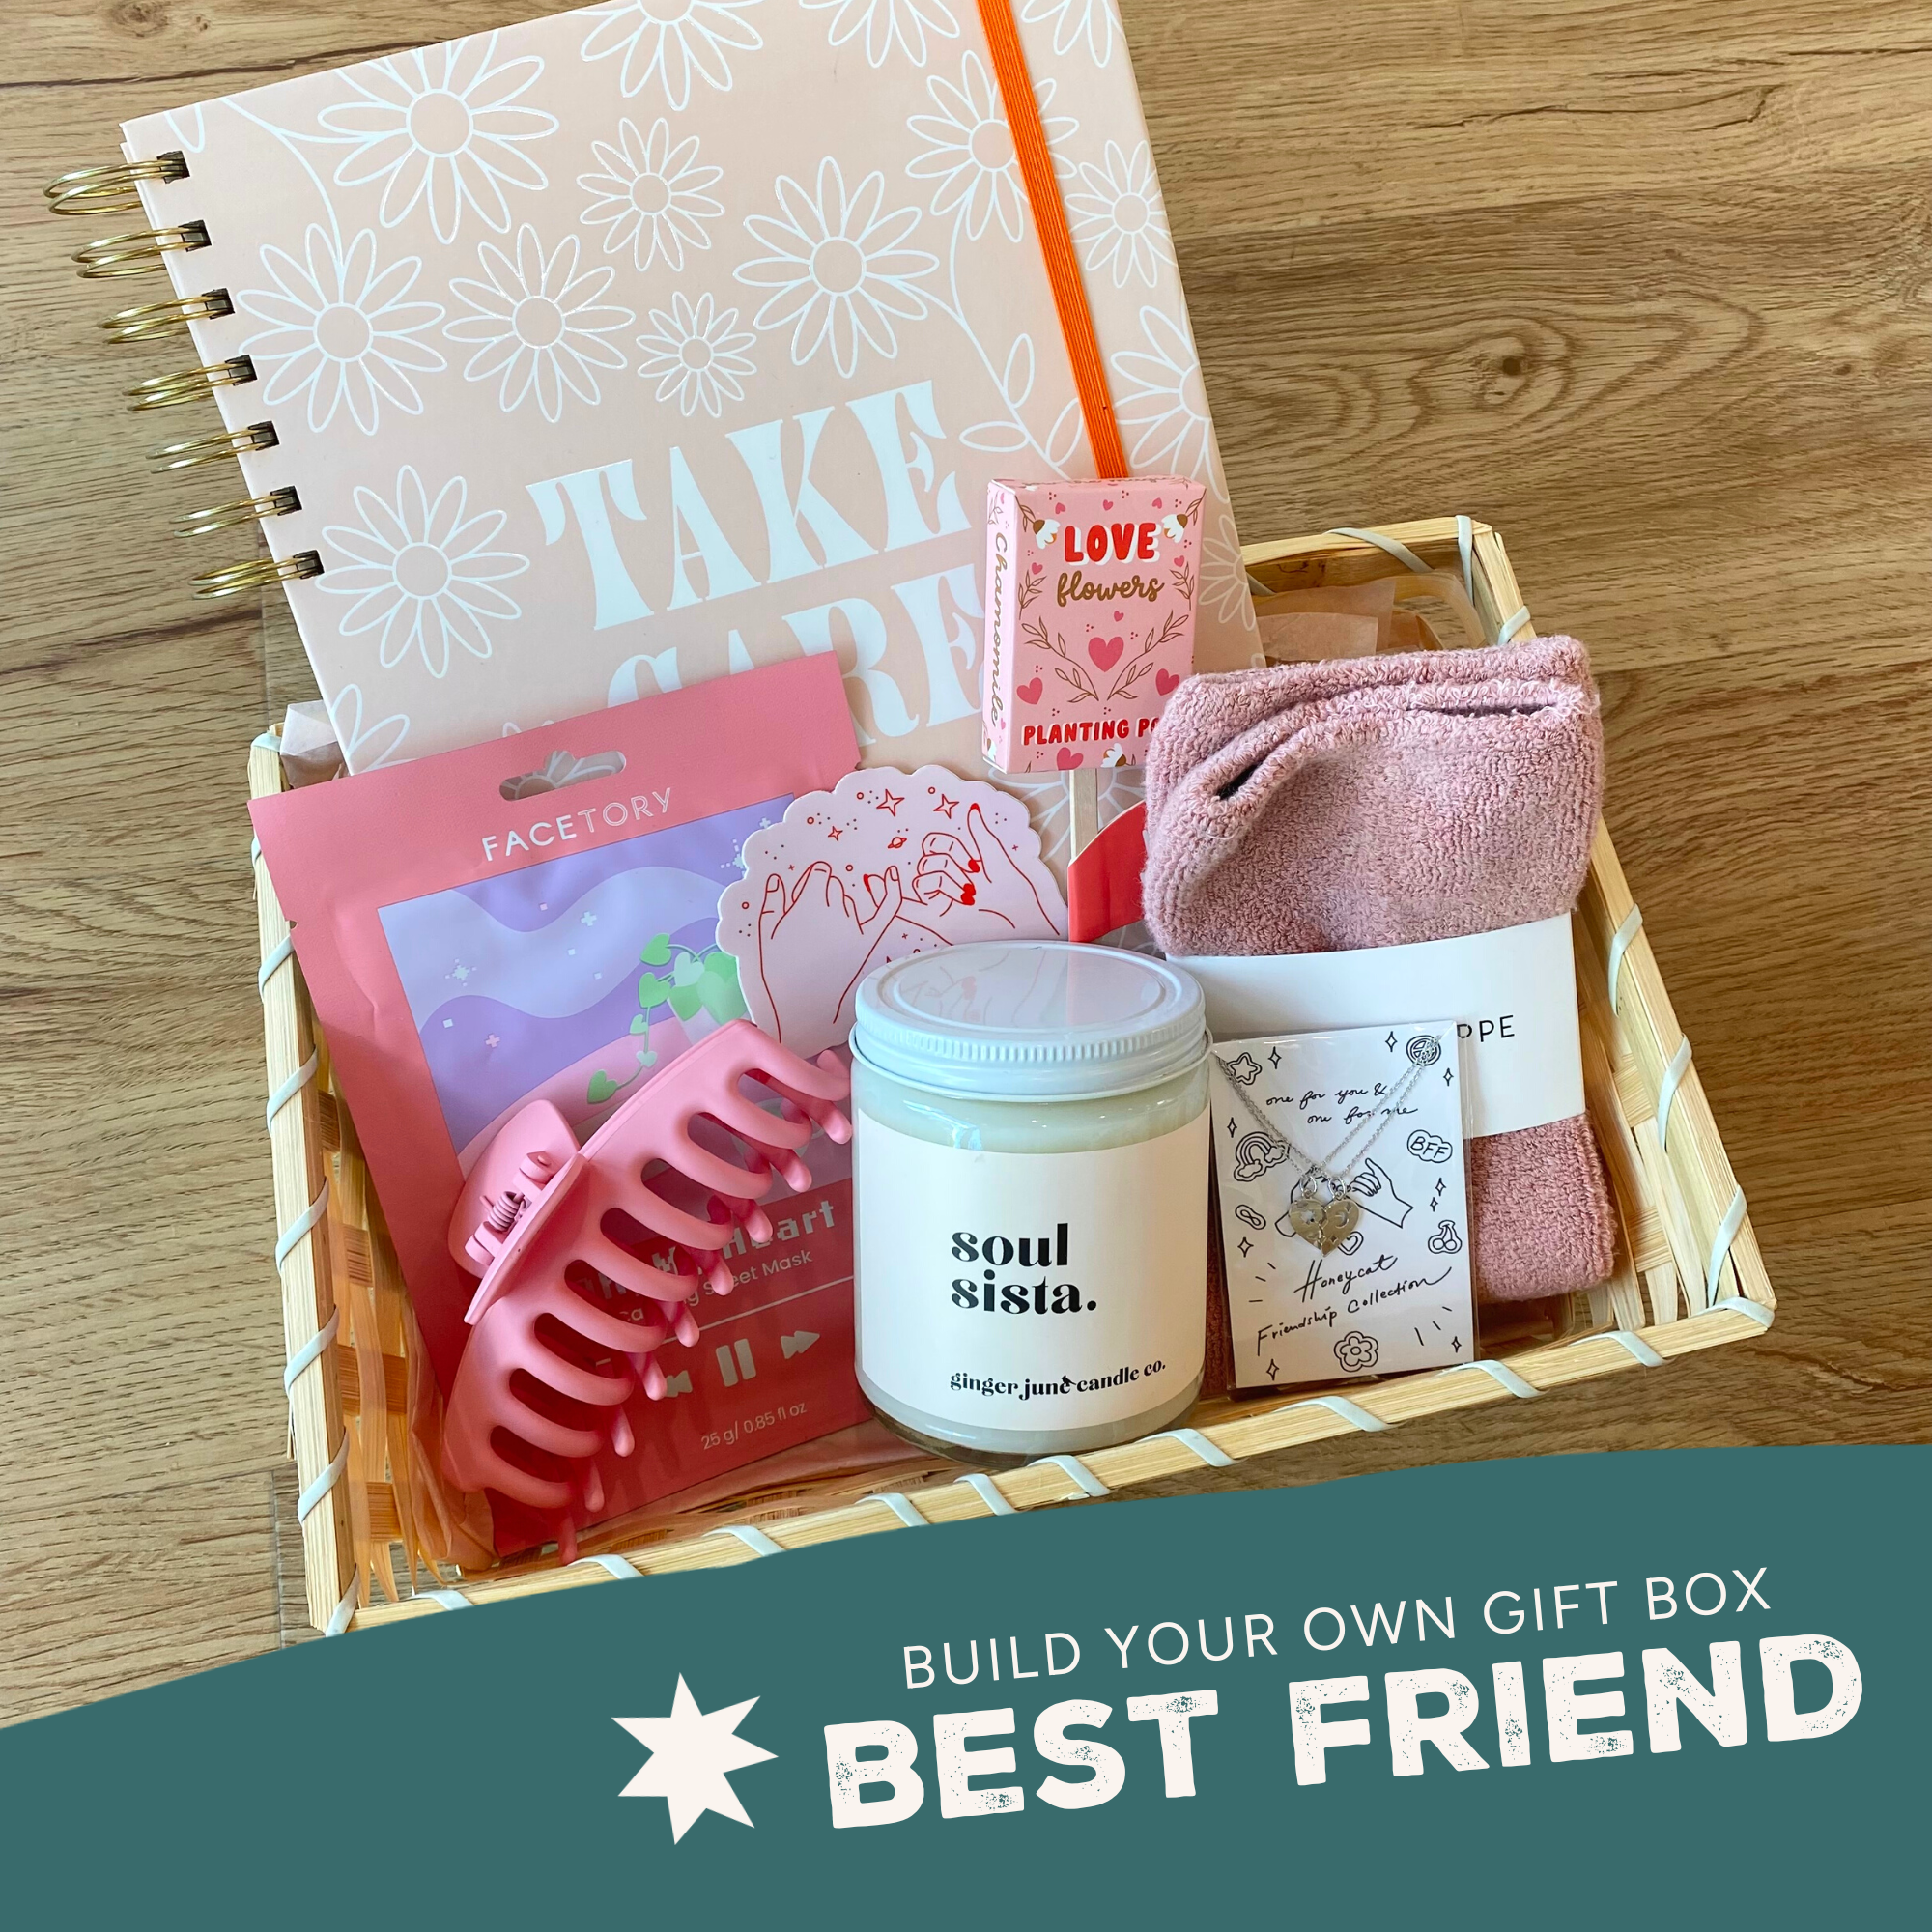 Best Friend: Build Your Own Gift Box